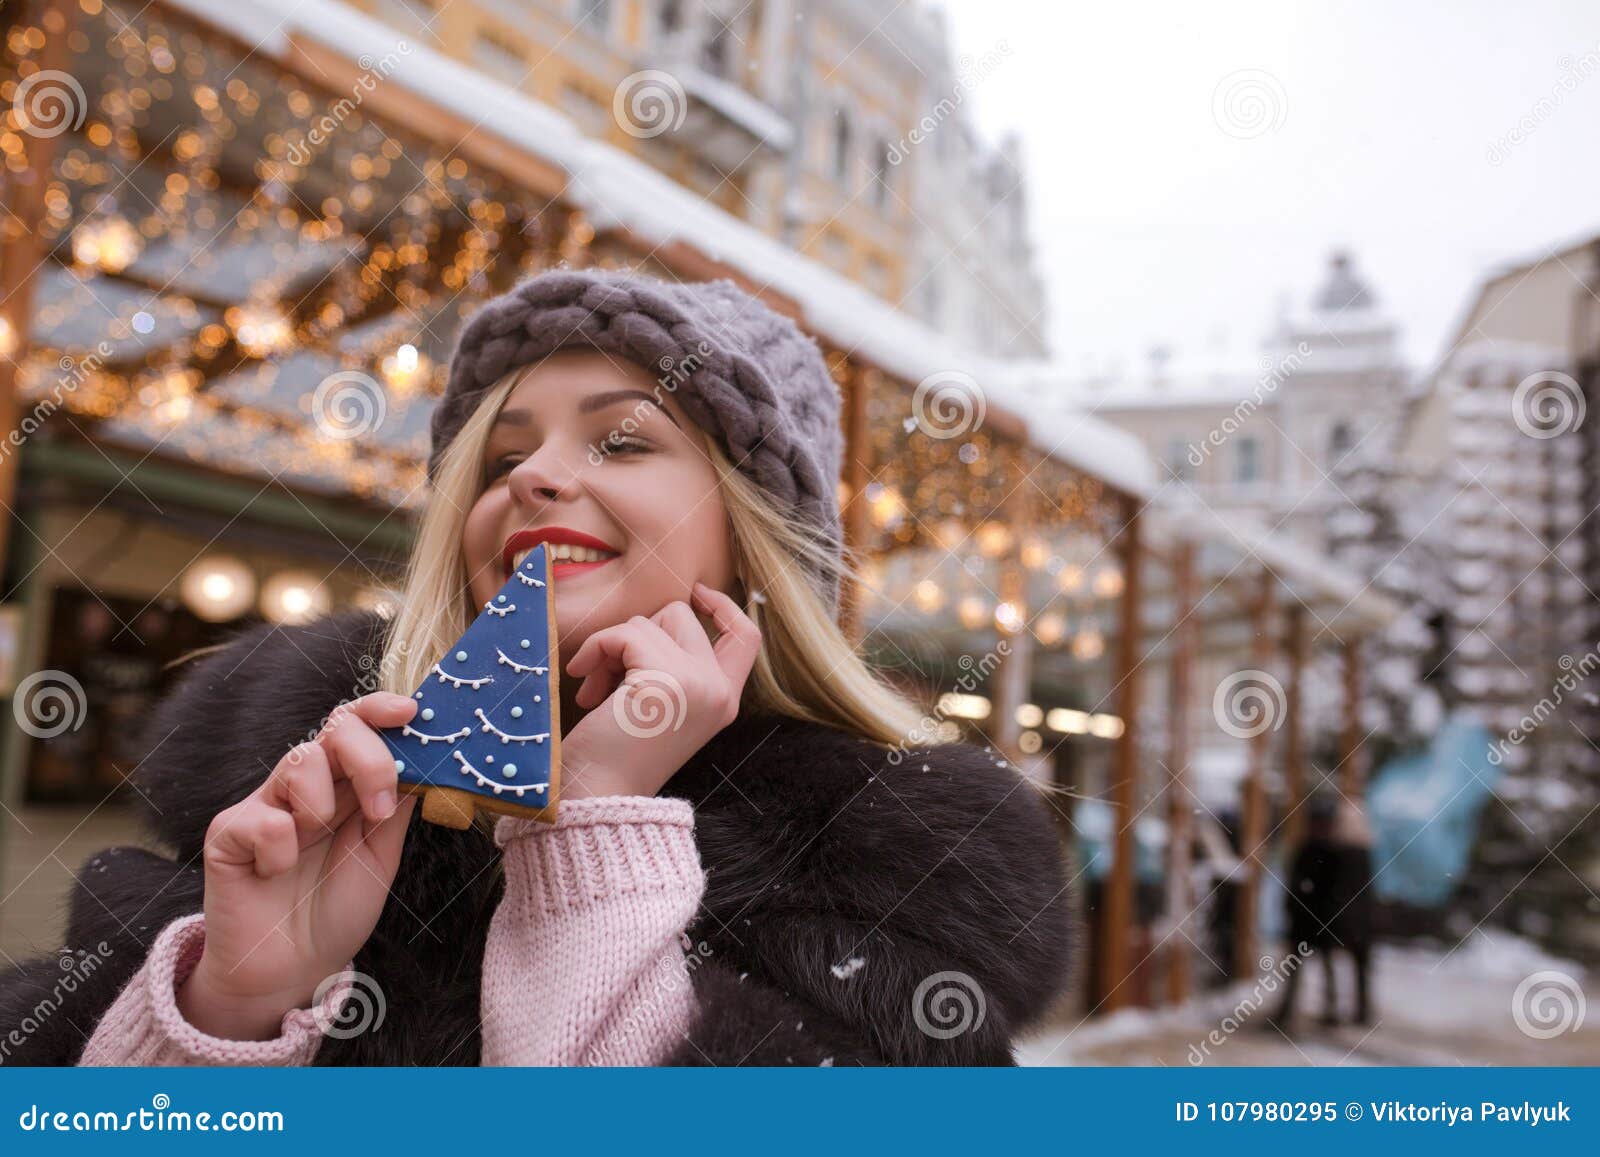 Merry Blonde Woman Holding Savory Gingerbread Against Light Decoration ...